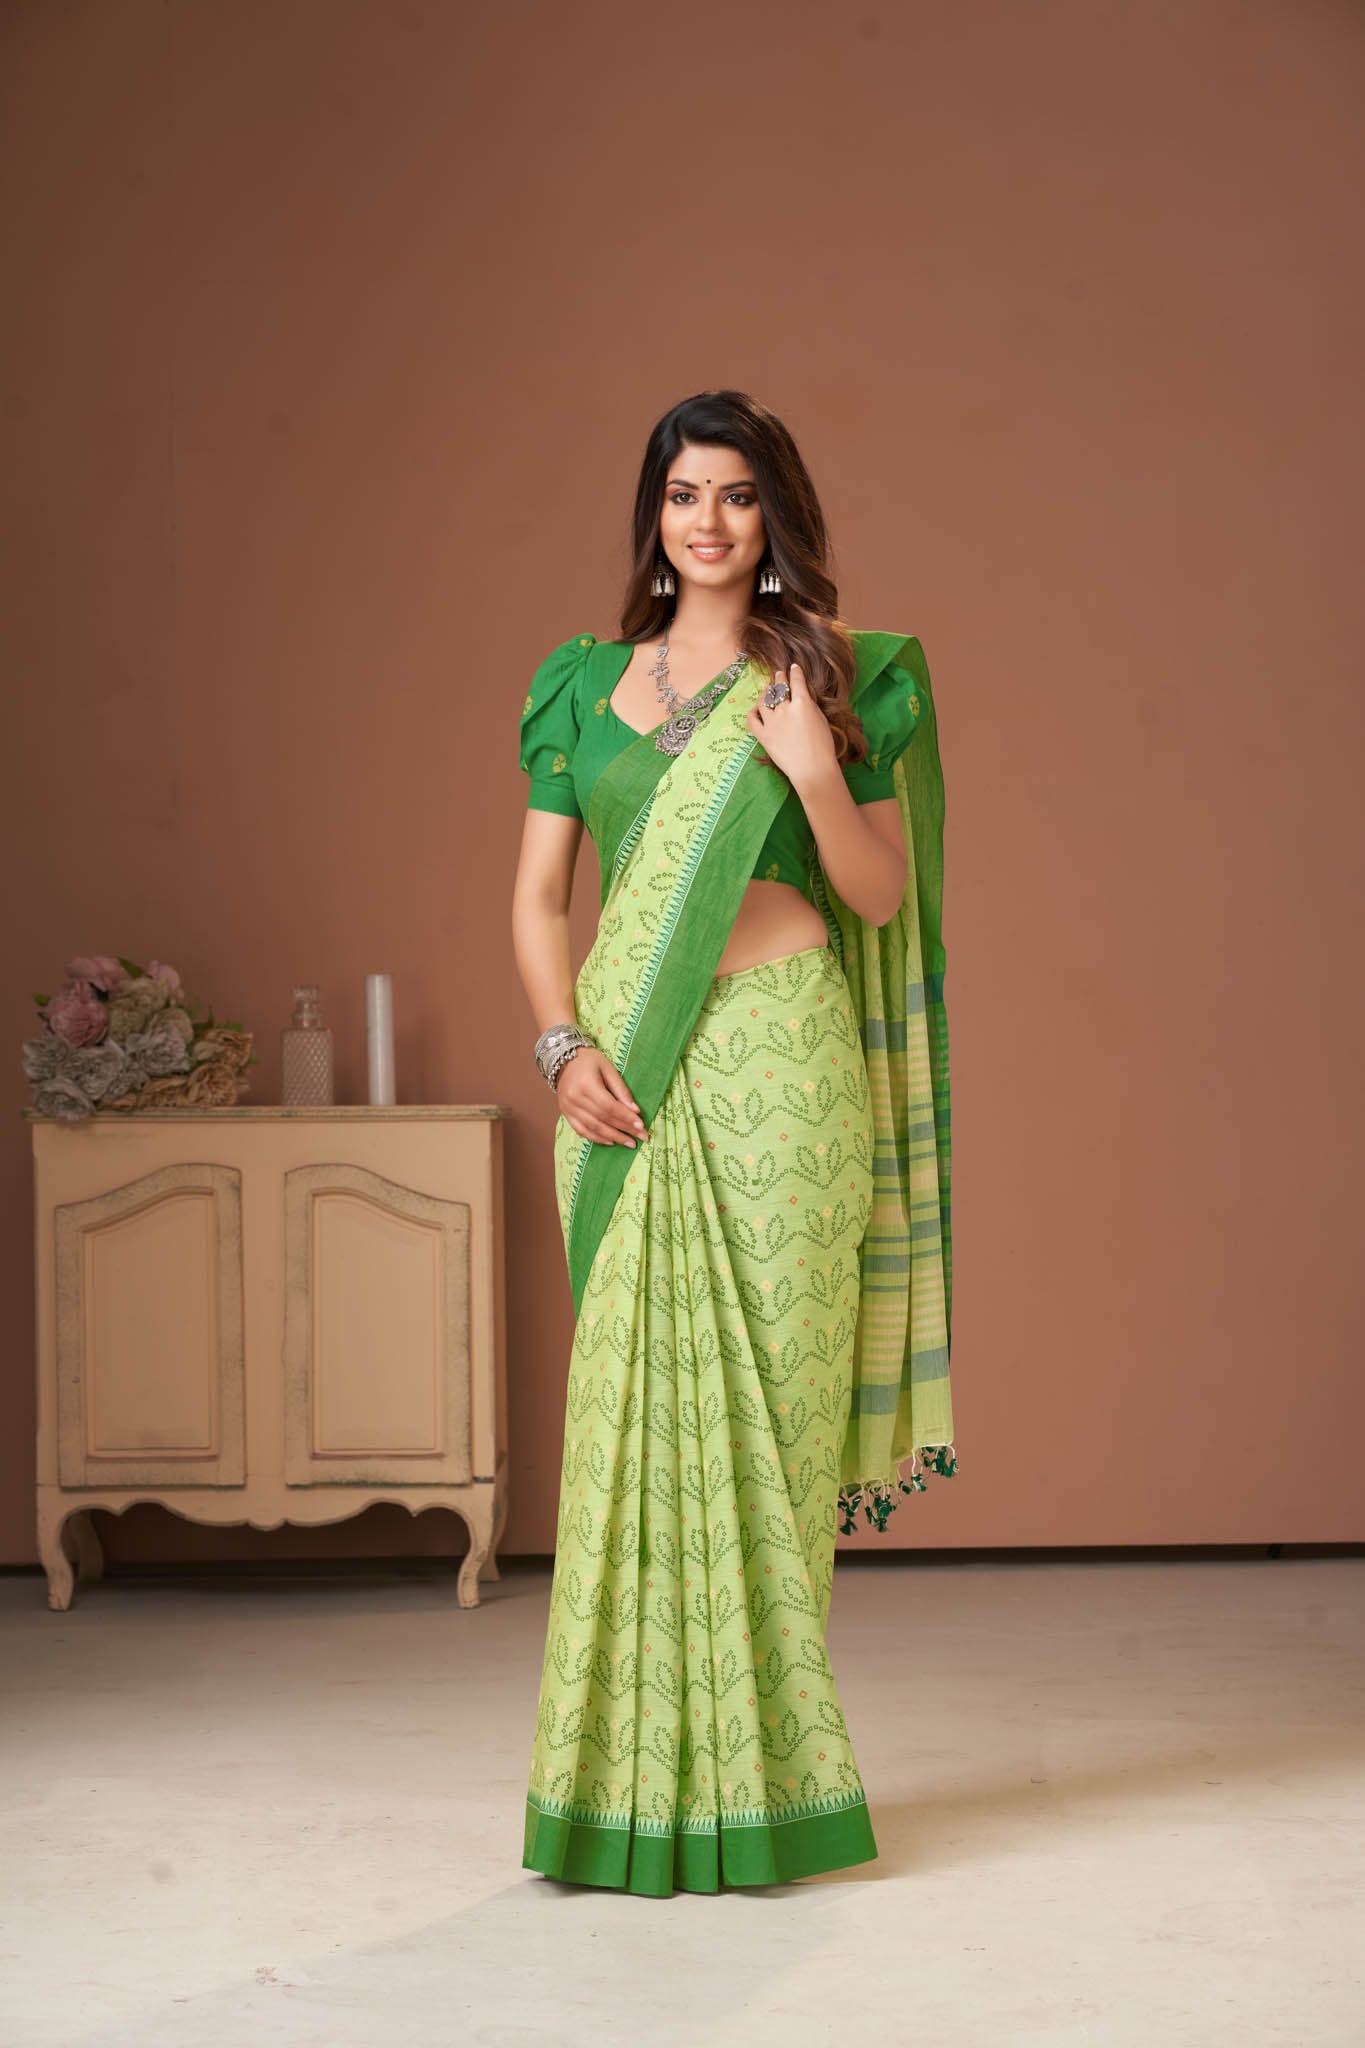 Hand Painted Sarees - Buy Hand Painted Cotton and Silk Sarees Online